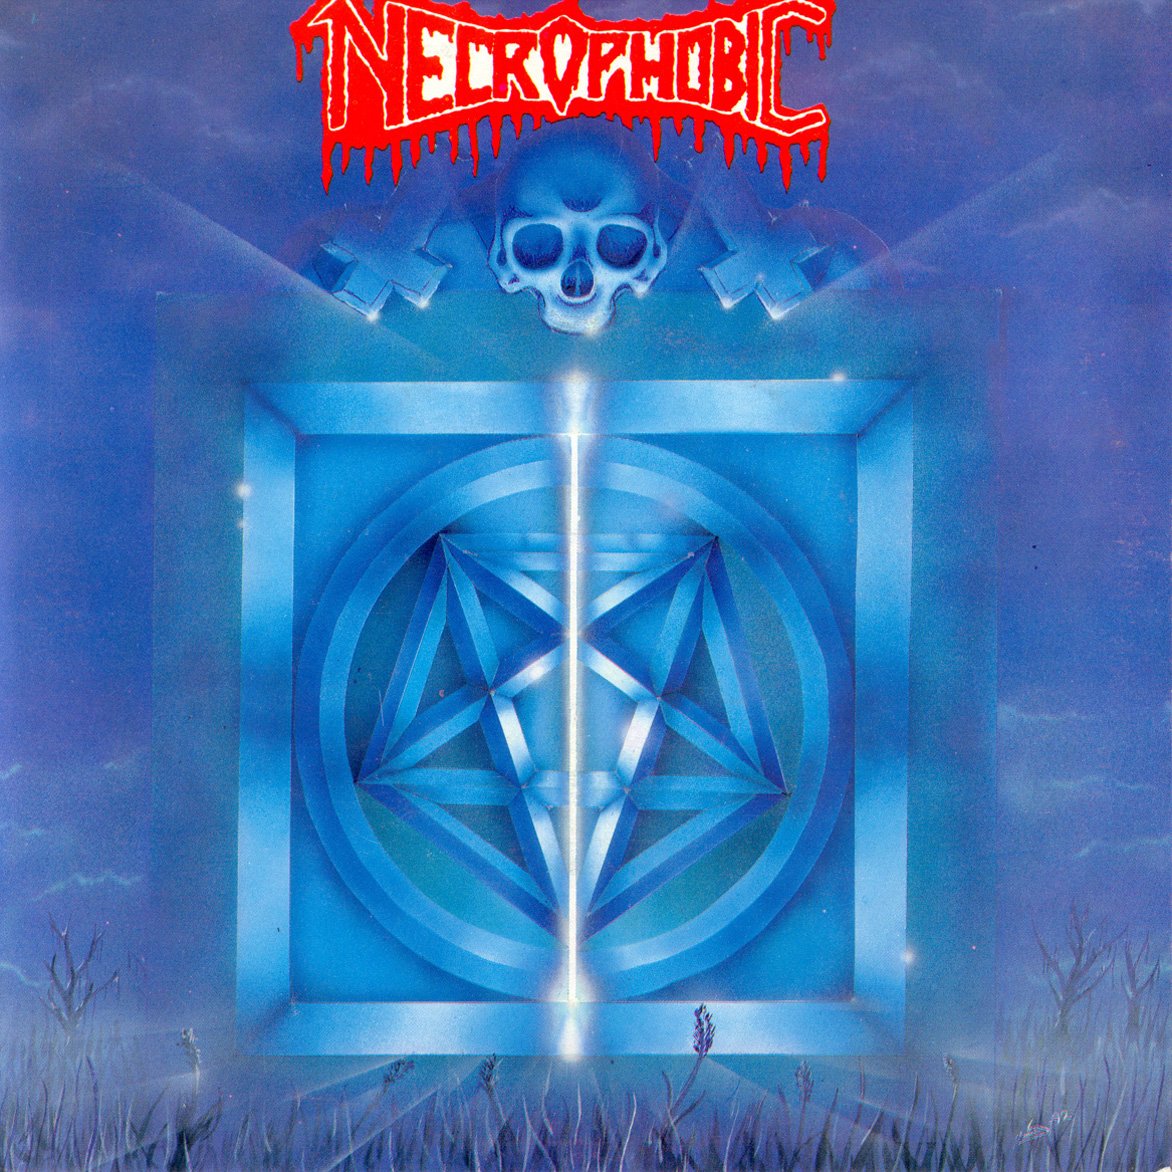 Necrophobic-The Call-PROPER-REMASTERED-EP-FLAC-2018-mwnd Download